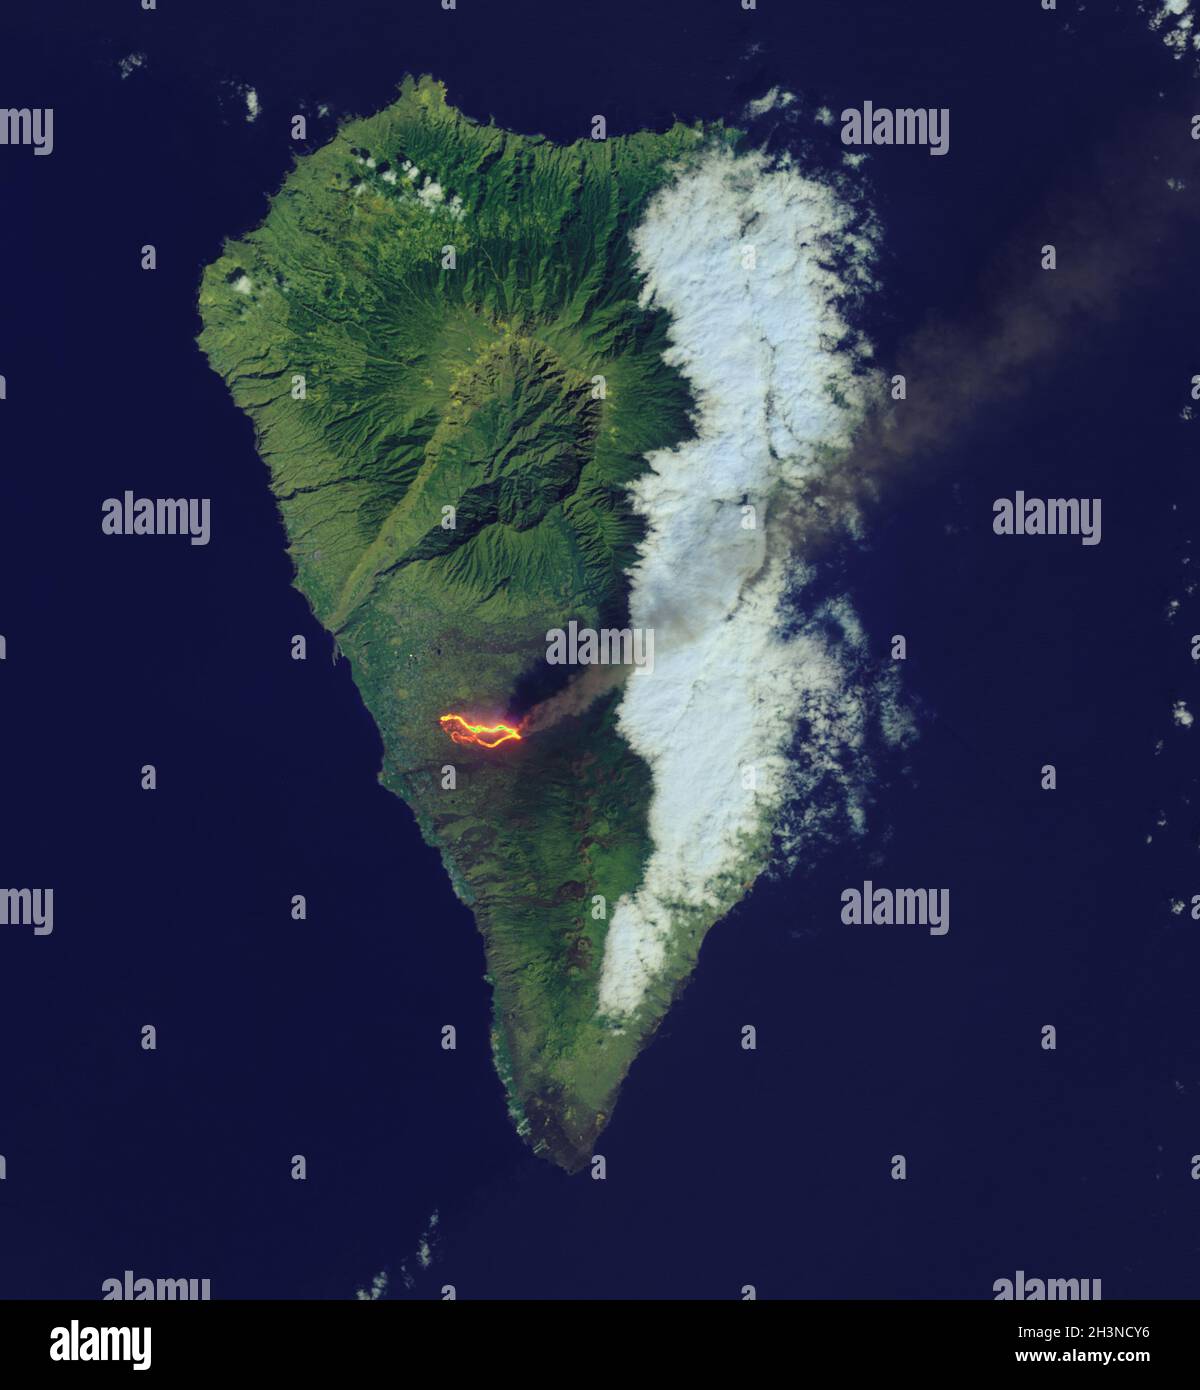 LA PALMA, CANARY ISLANDS - 26 September 2021 - The Operational Land Imager (OLI) on Landsat 8 captured a natural-color image (above) of lava flowing t Stock Photo